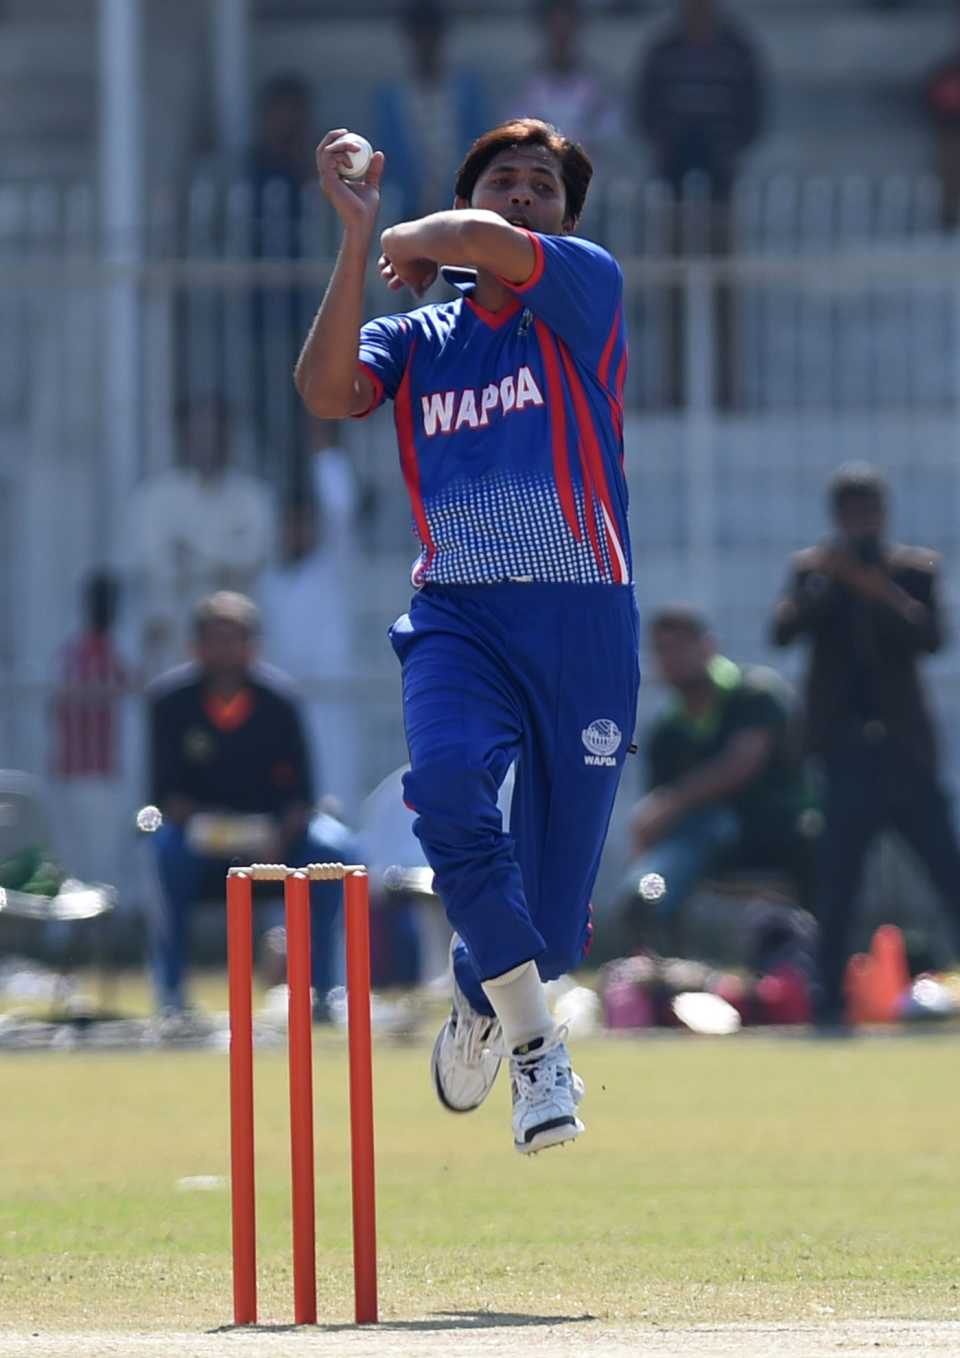 Mohammad Asif in his delivery stride, FATA v WAPDA, National One Day Cup 2015-16, Hyderabad, January 10, 2016